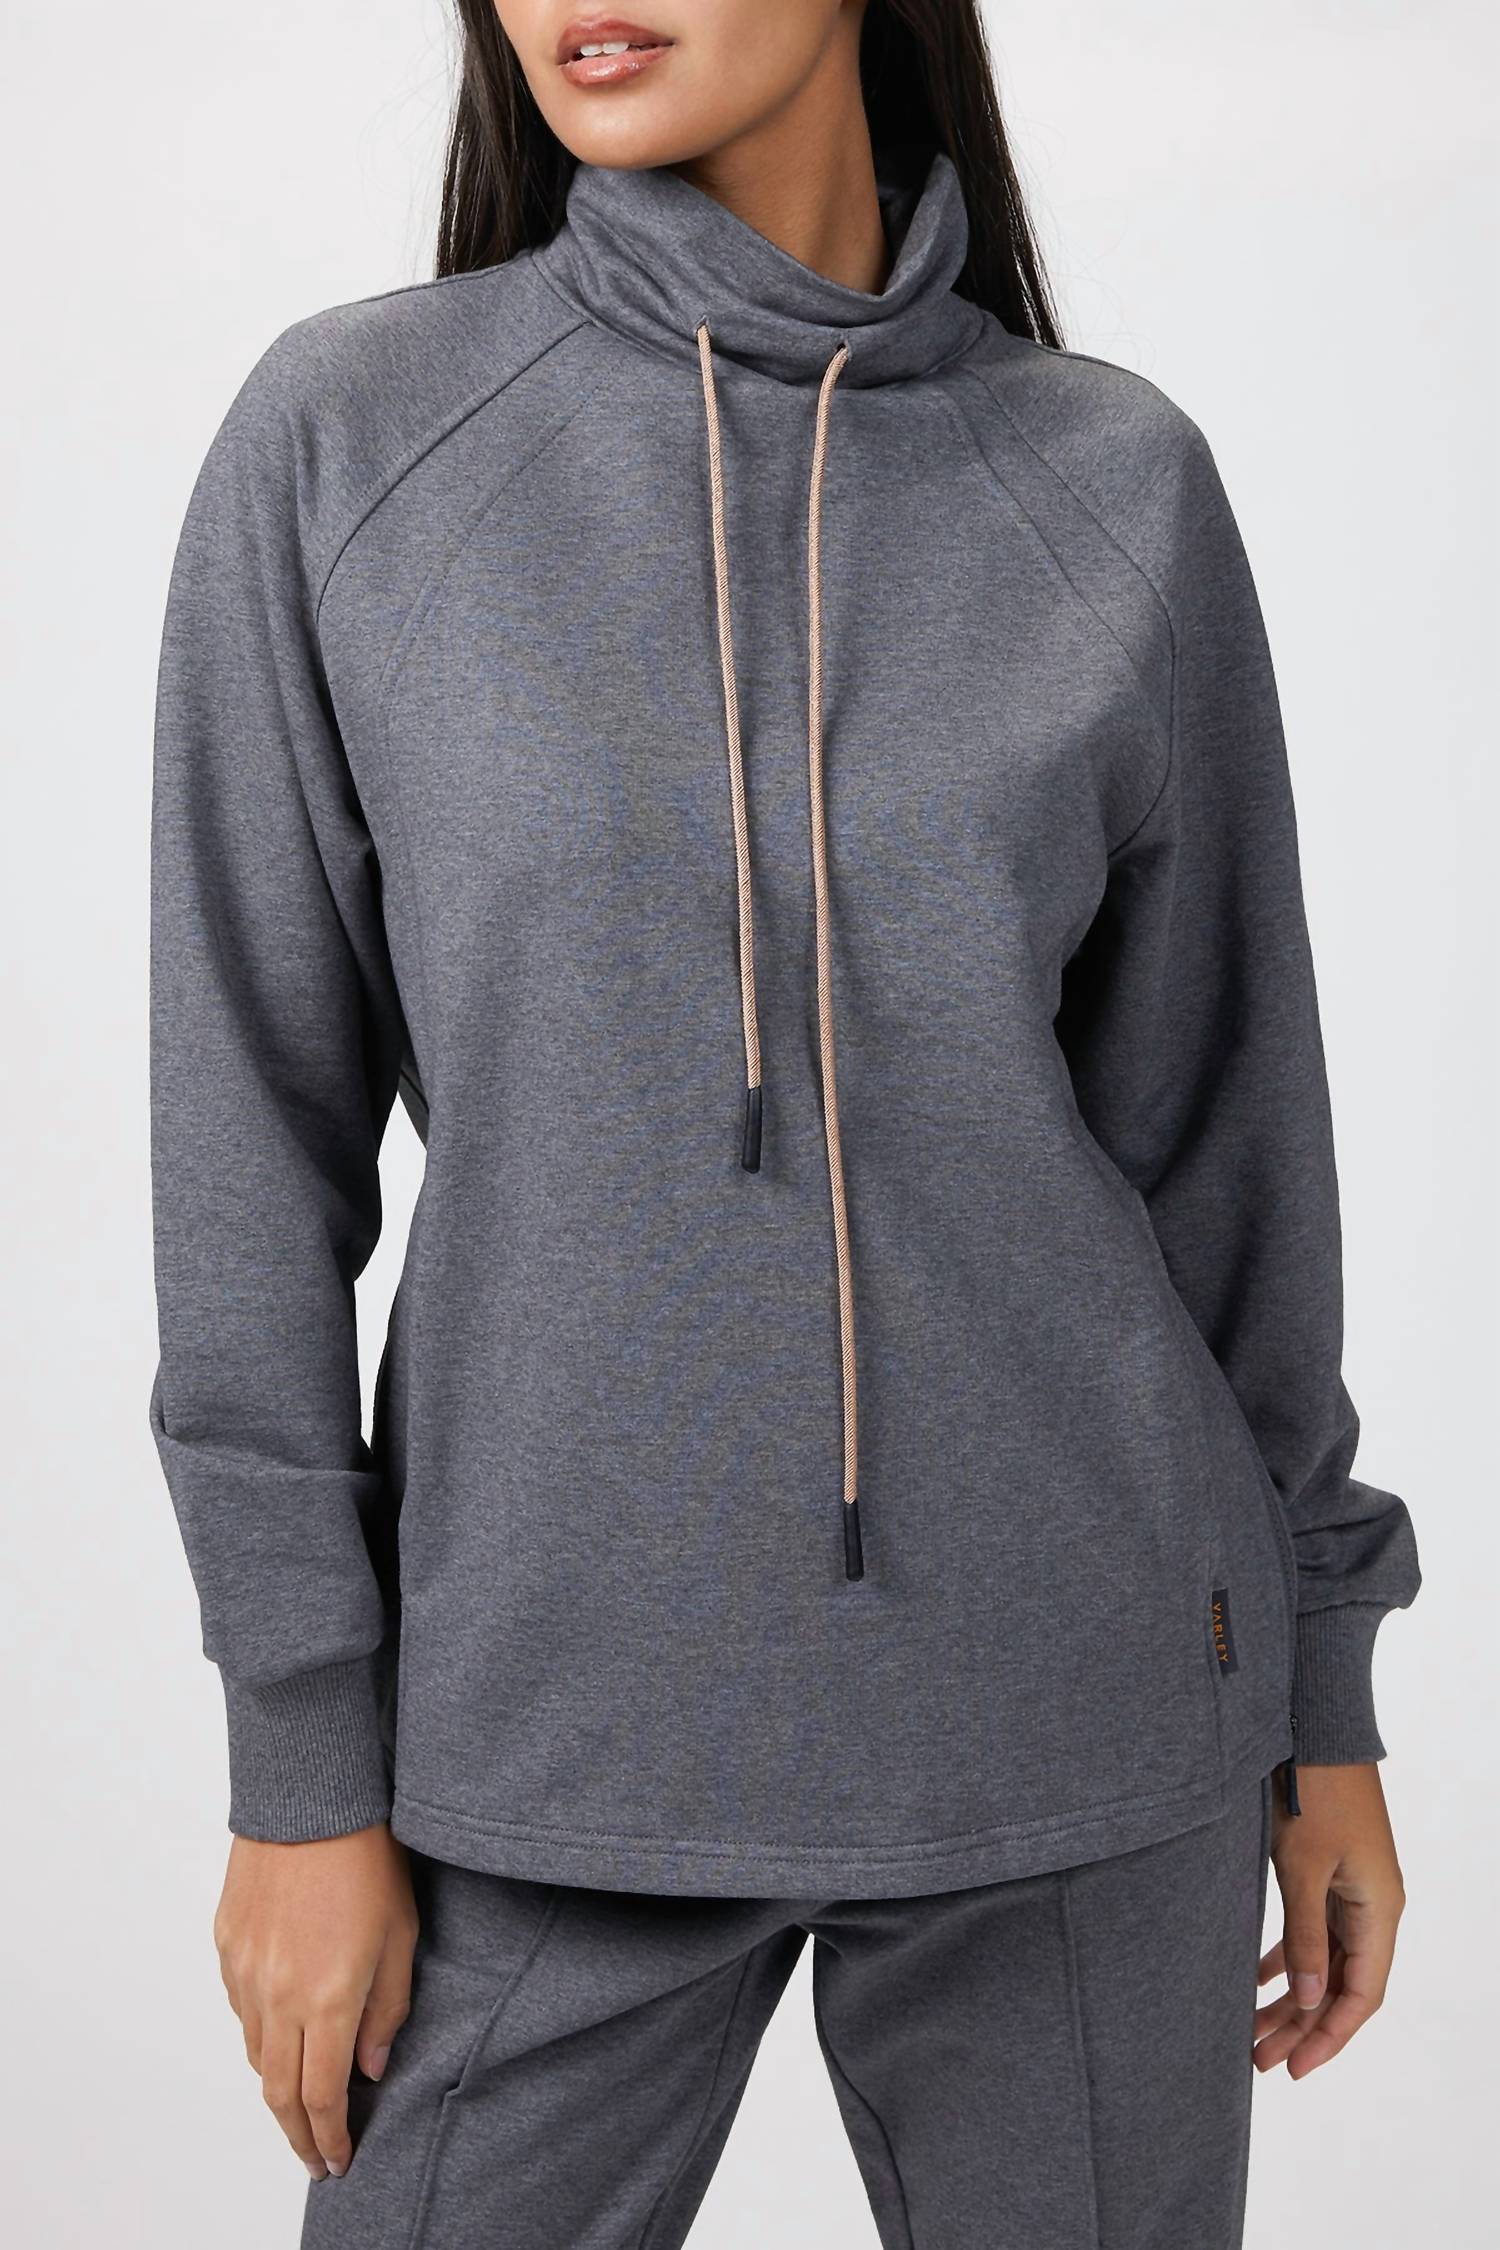 Shop Varley Atlas Sweater In Forged Iron Marl In Grey